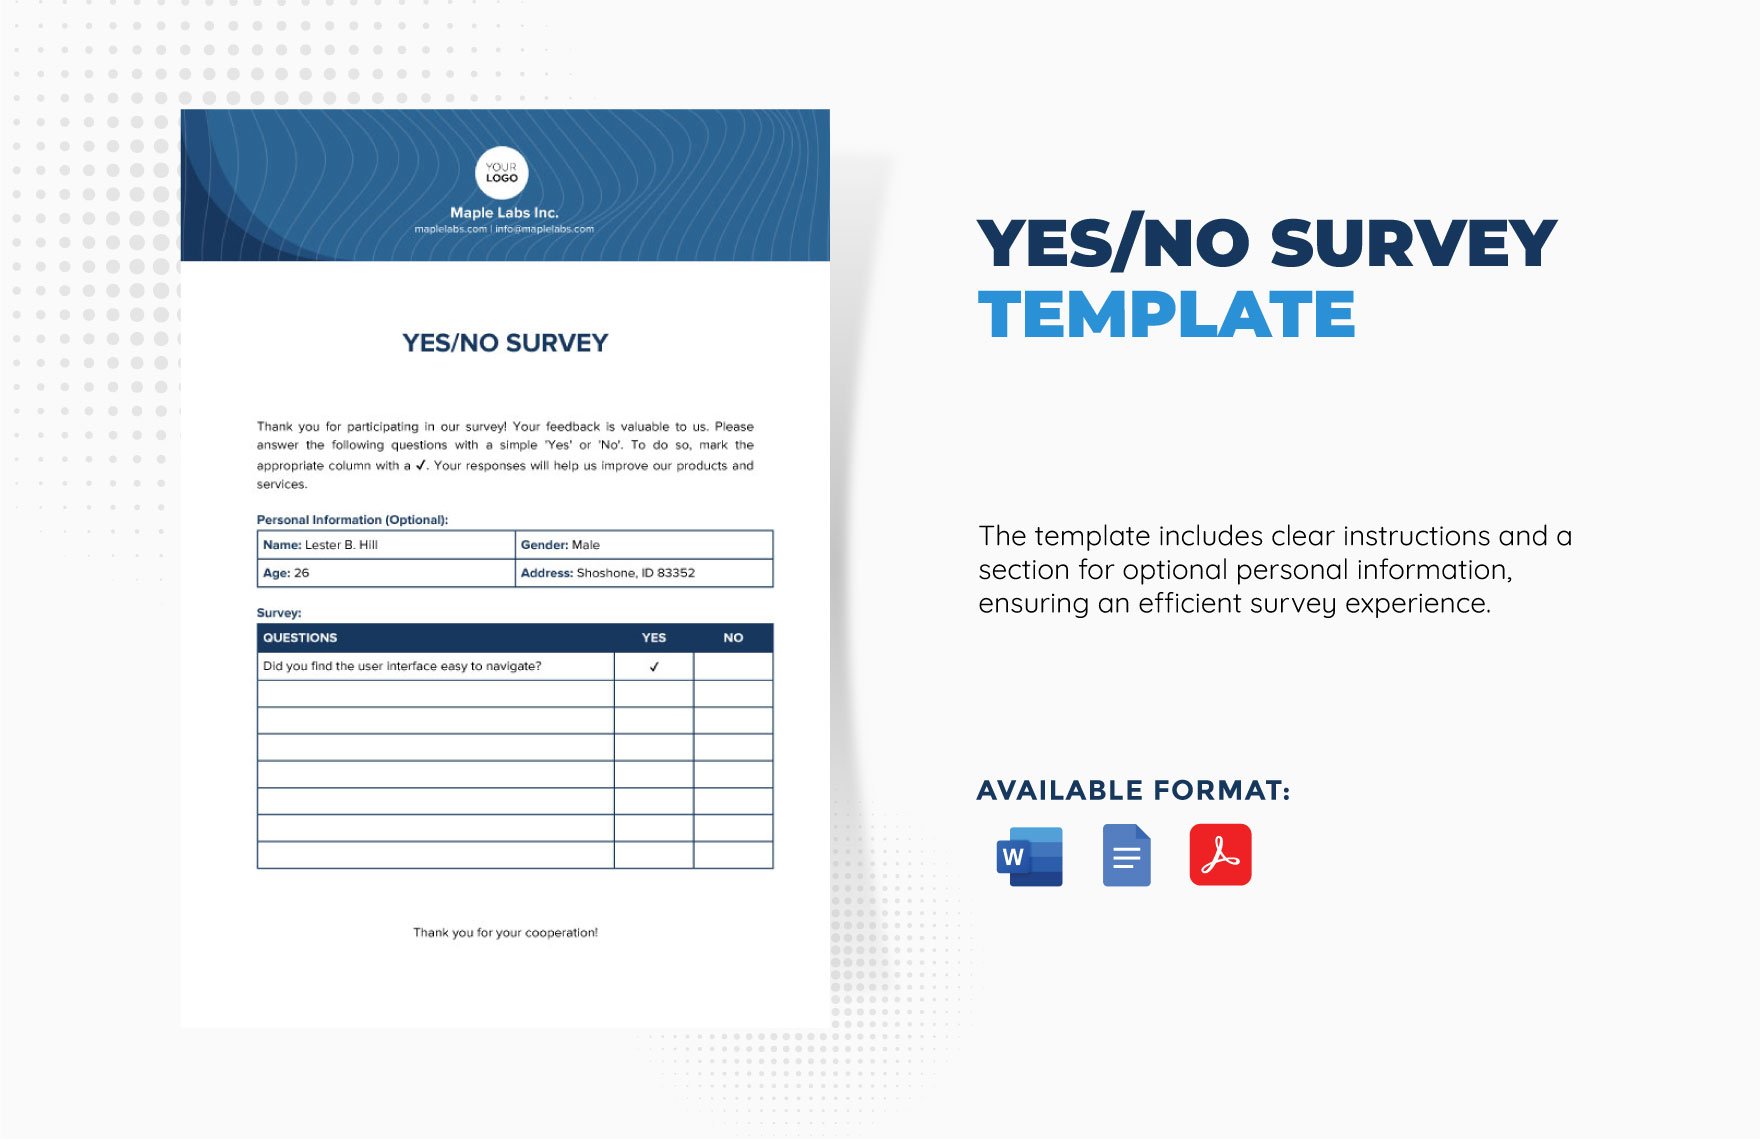 Yes/No Survey Template